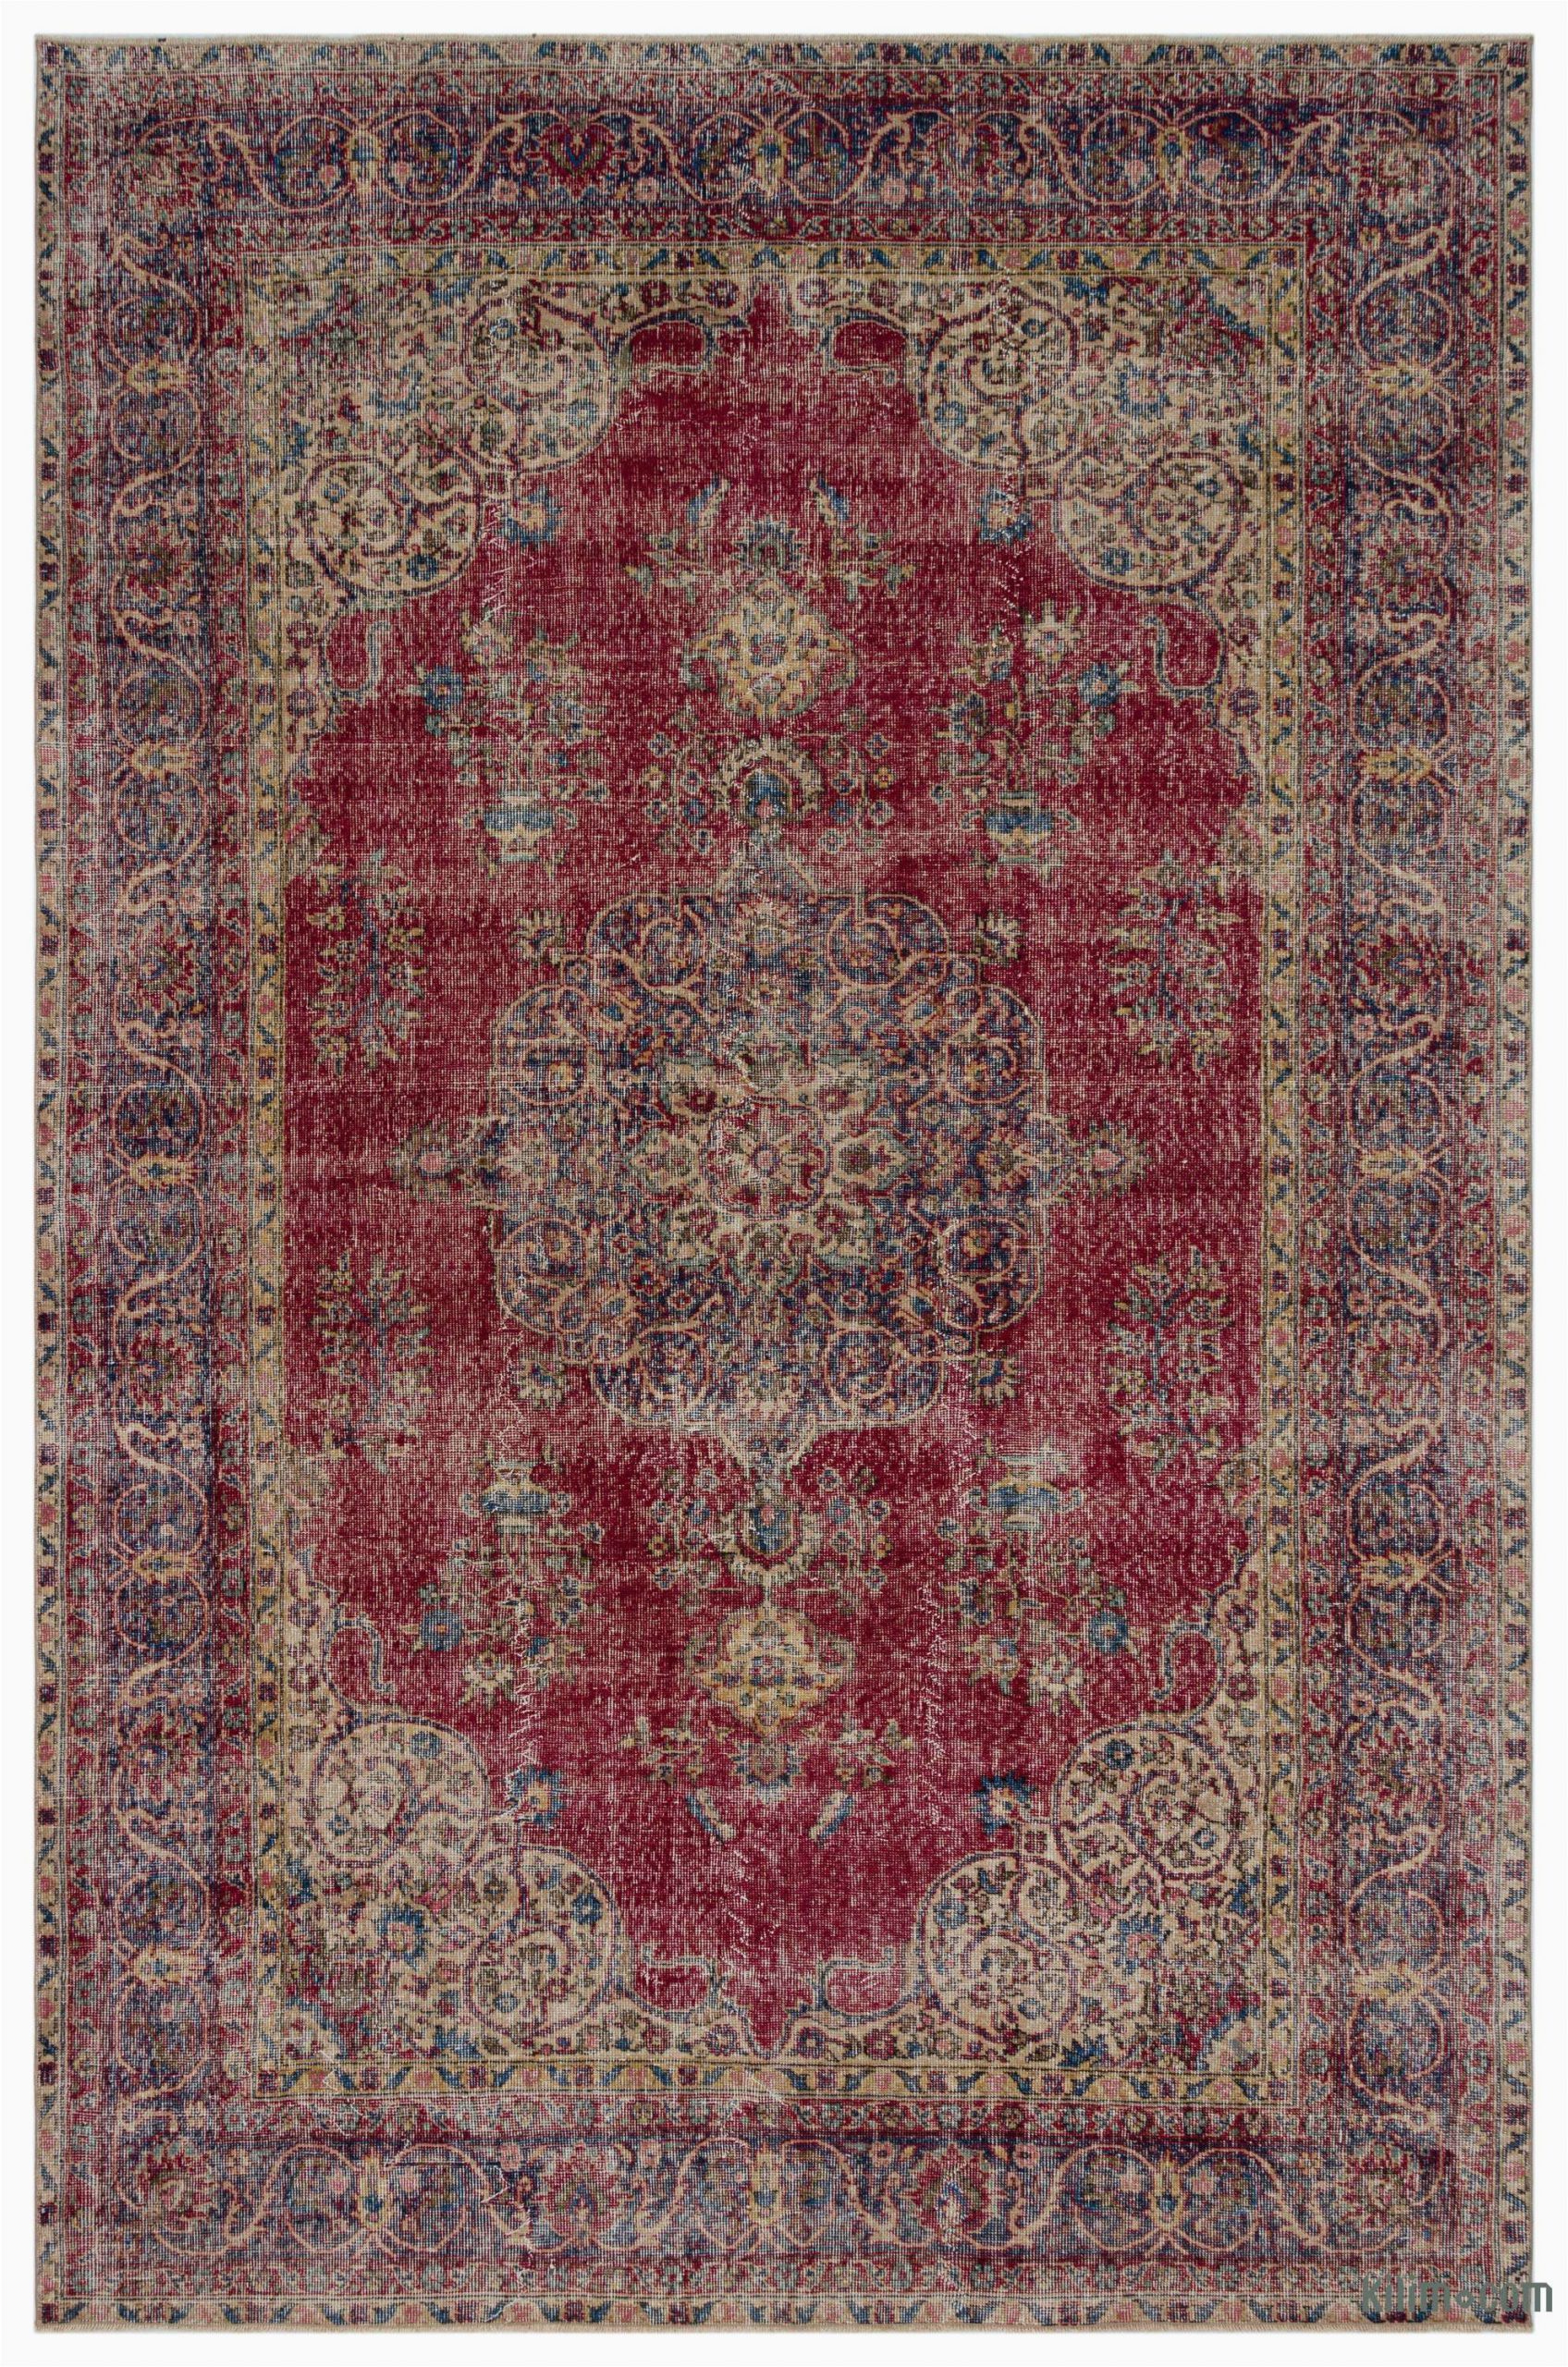 6 by 7 area Rug Turkish Vintage area Rug 6 7" X 10 1" 79 In X 121 In